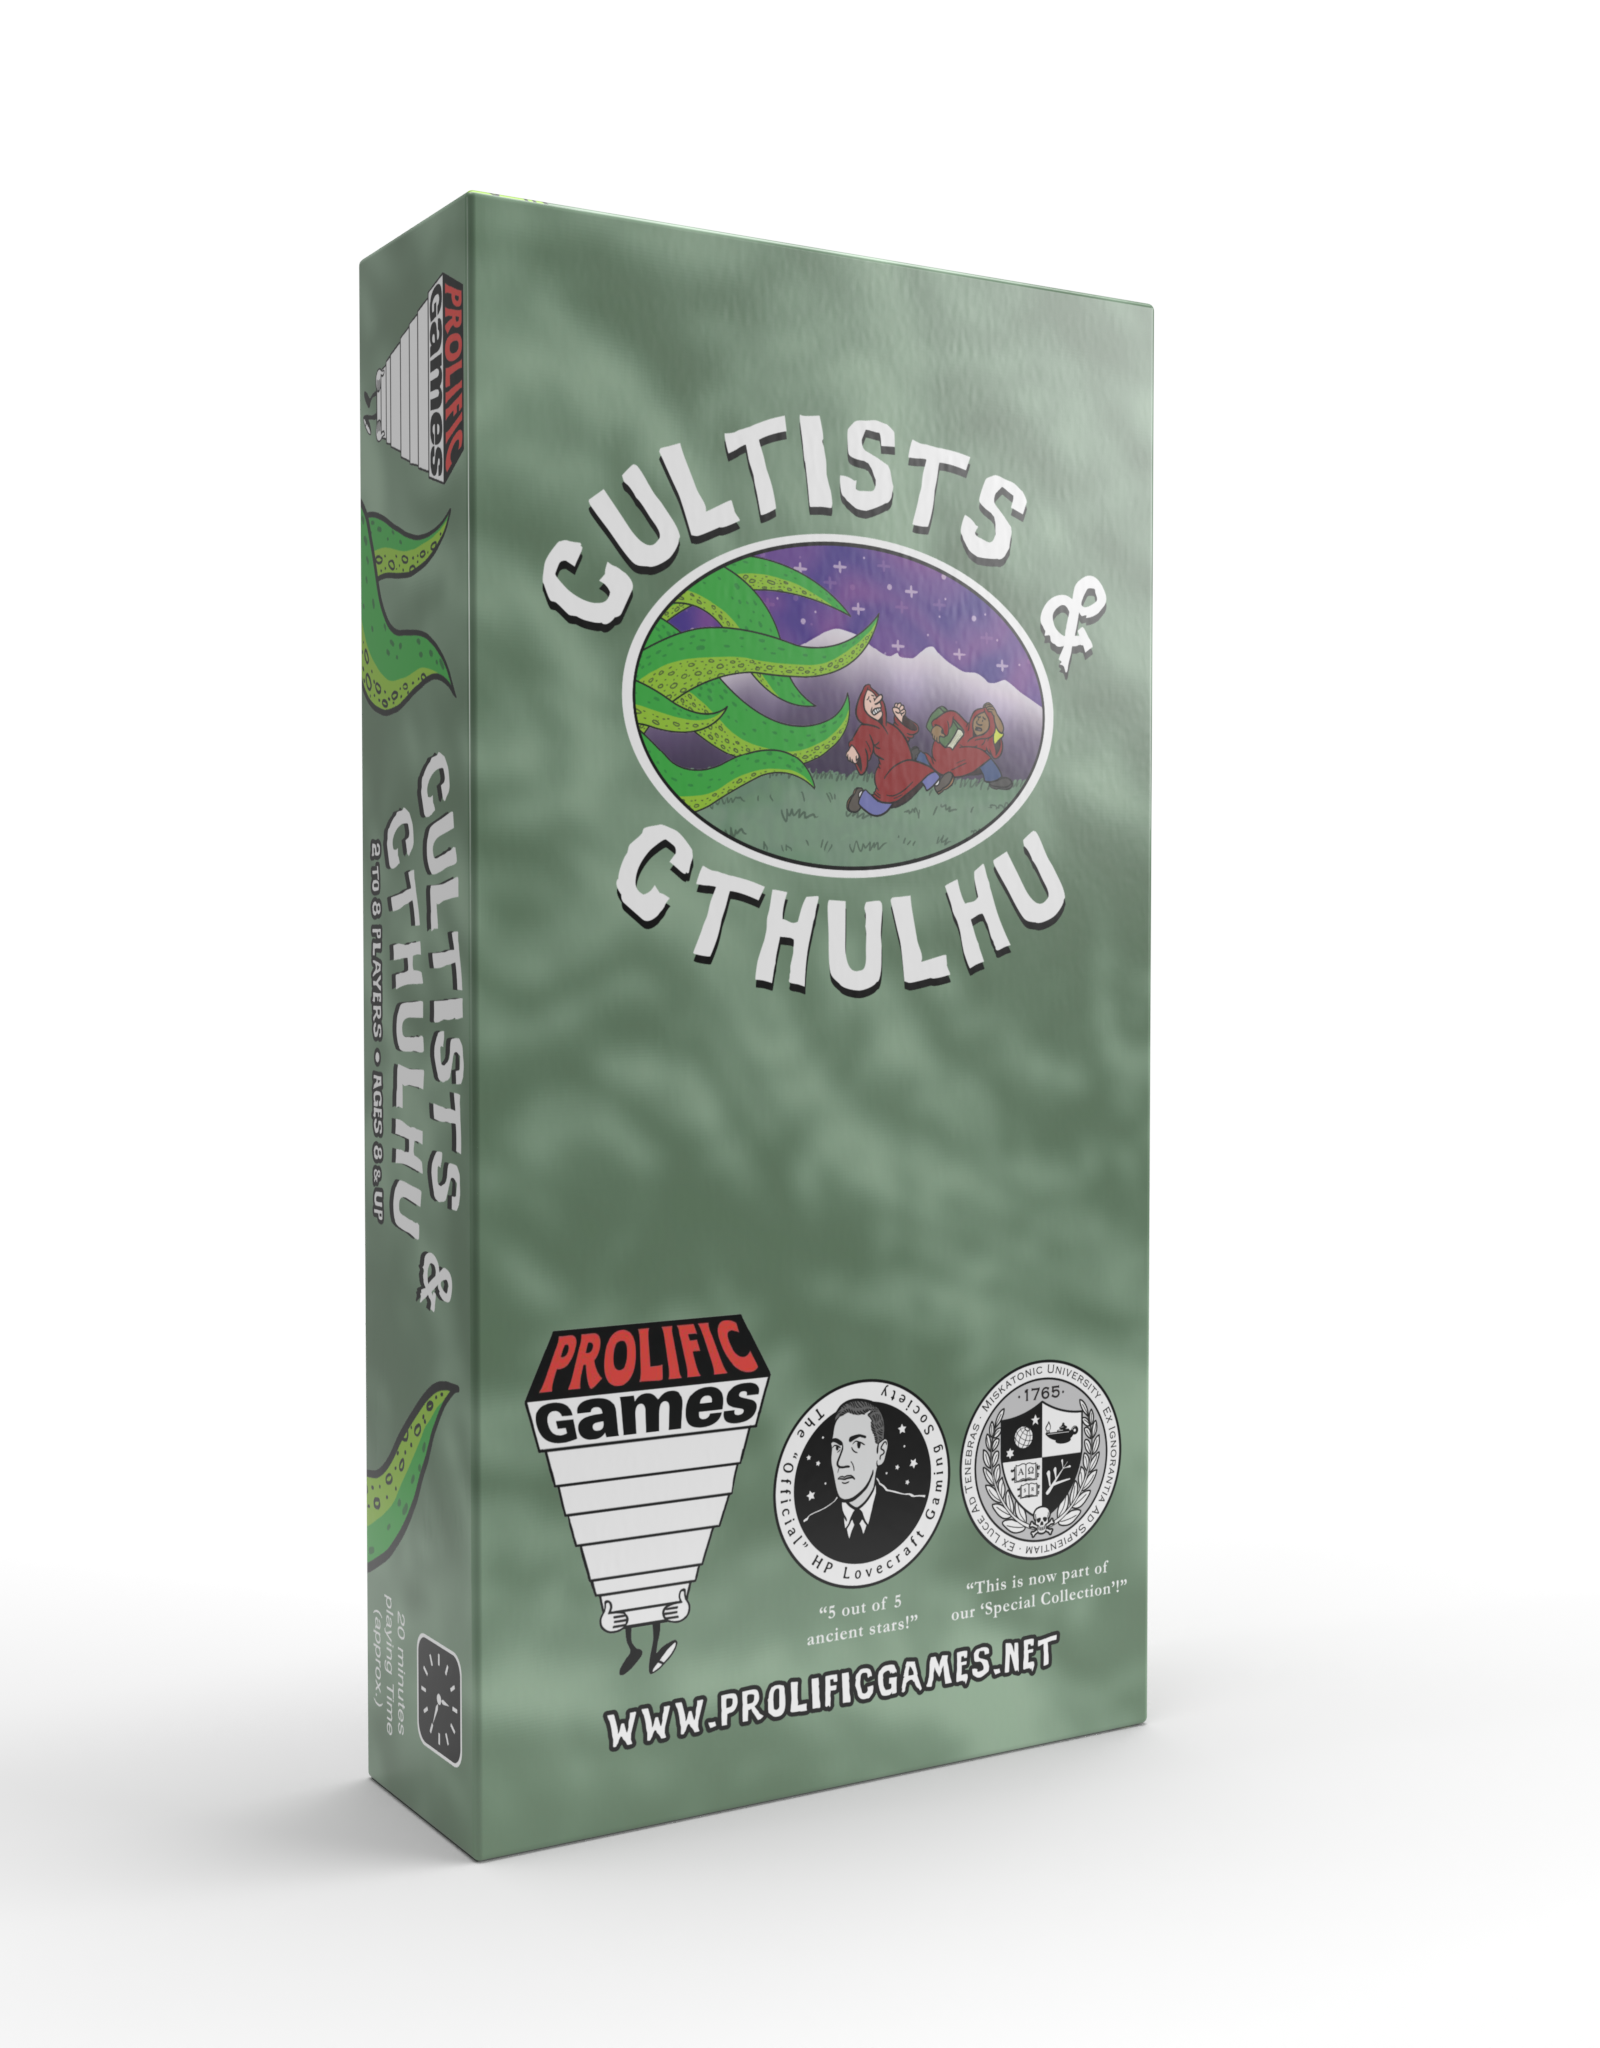 Prolific Games Cultists & Cthulhu